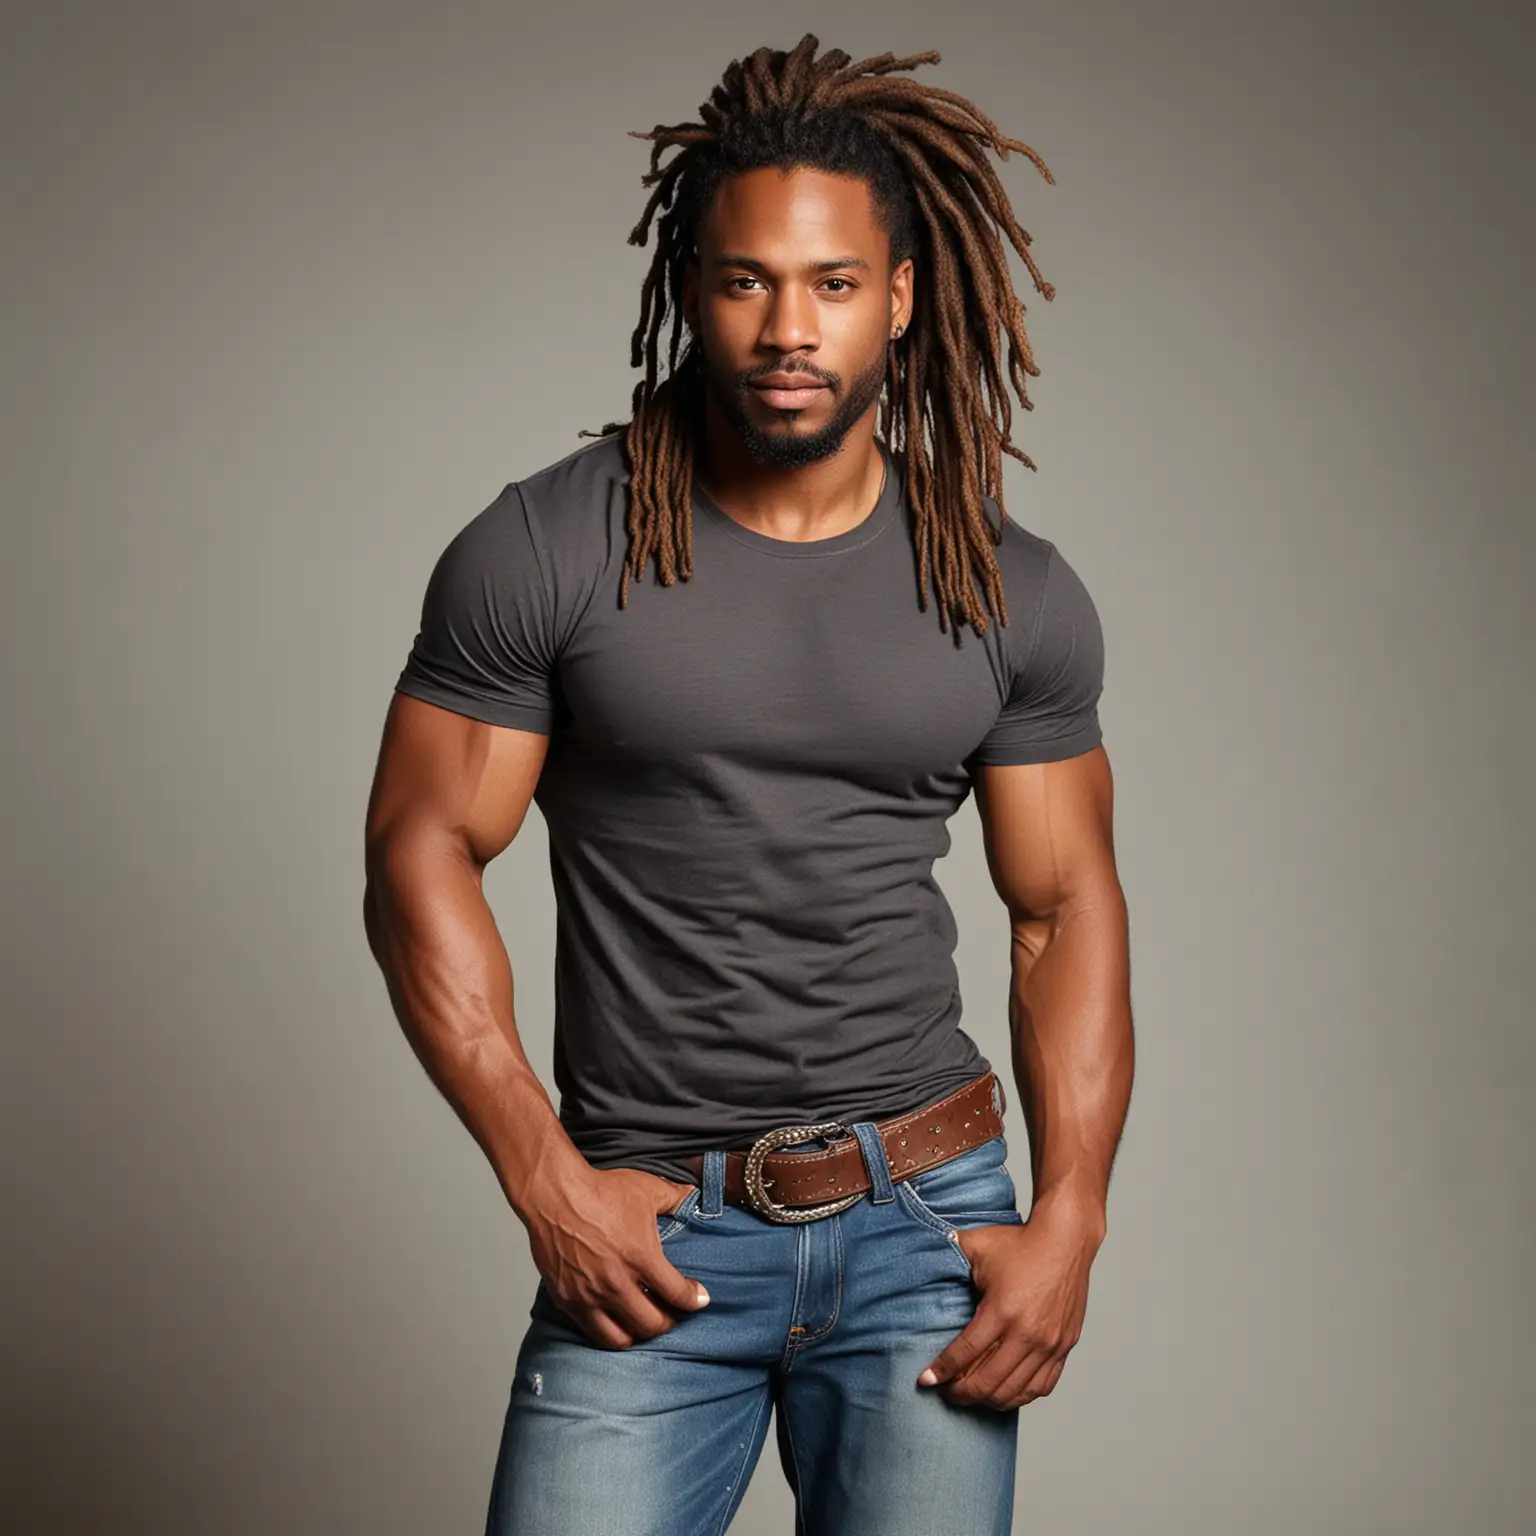 african american male, with dreadlocks, muscles, beard, brown eyes, t-shirt, jeans, cowboy boots  